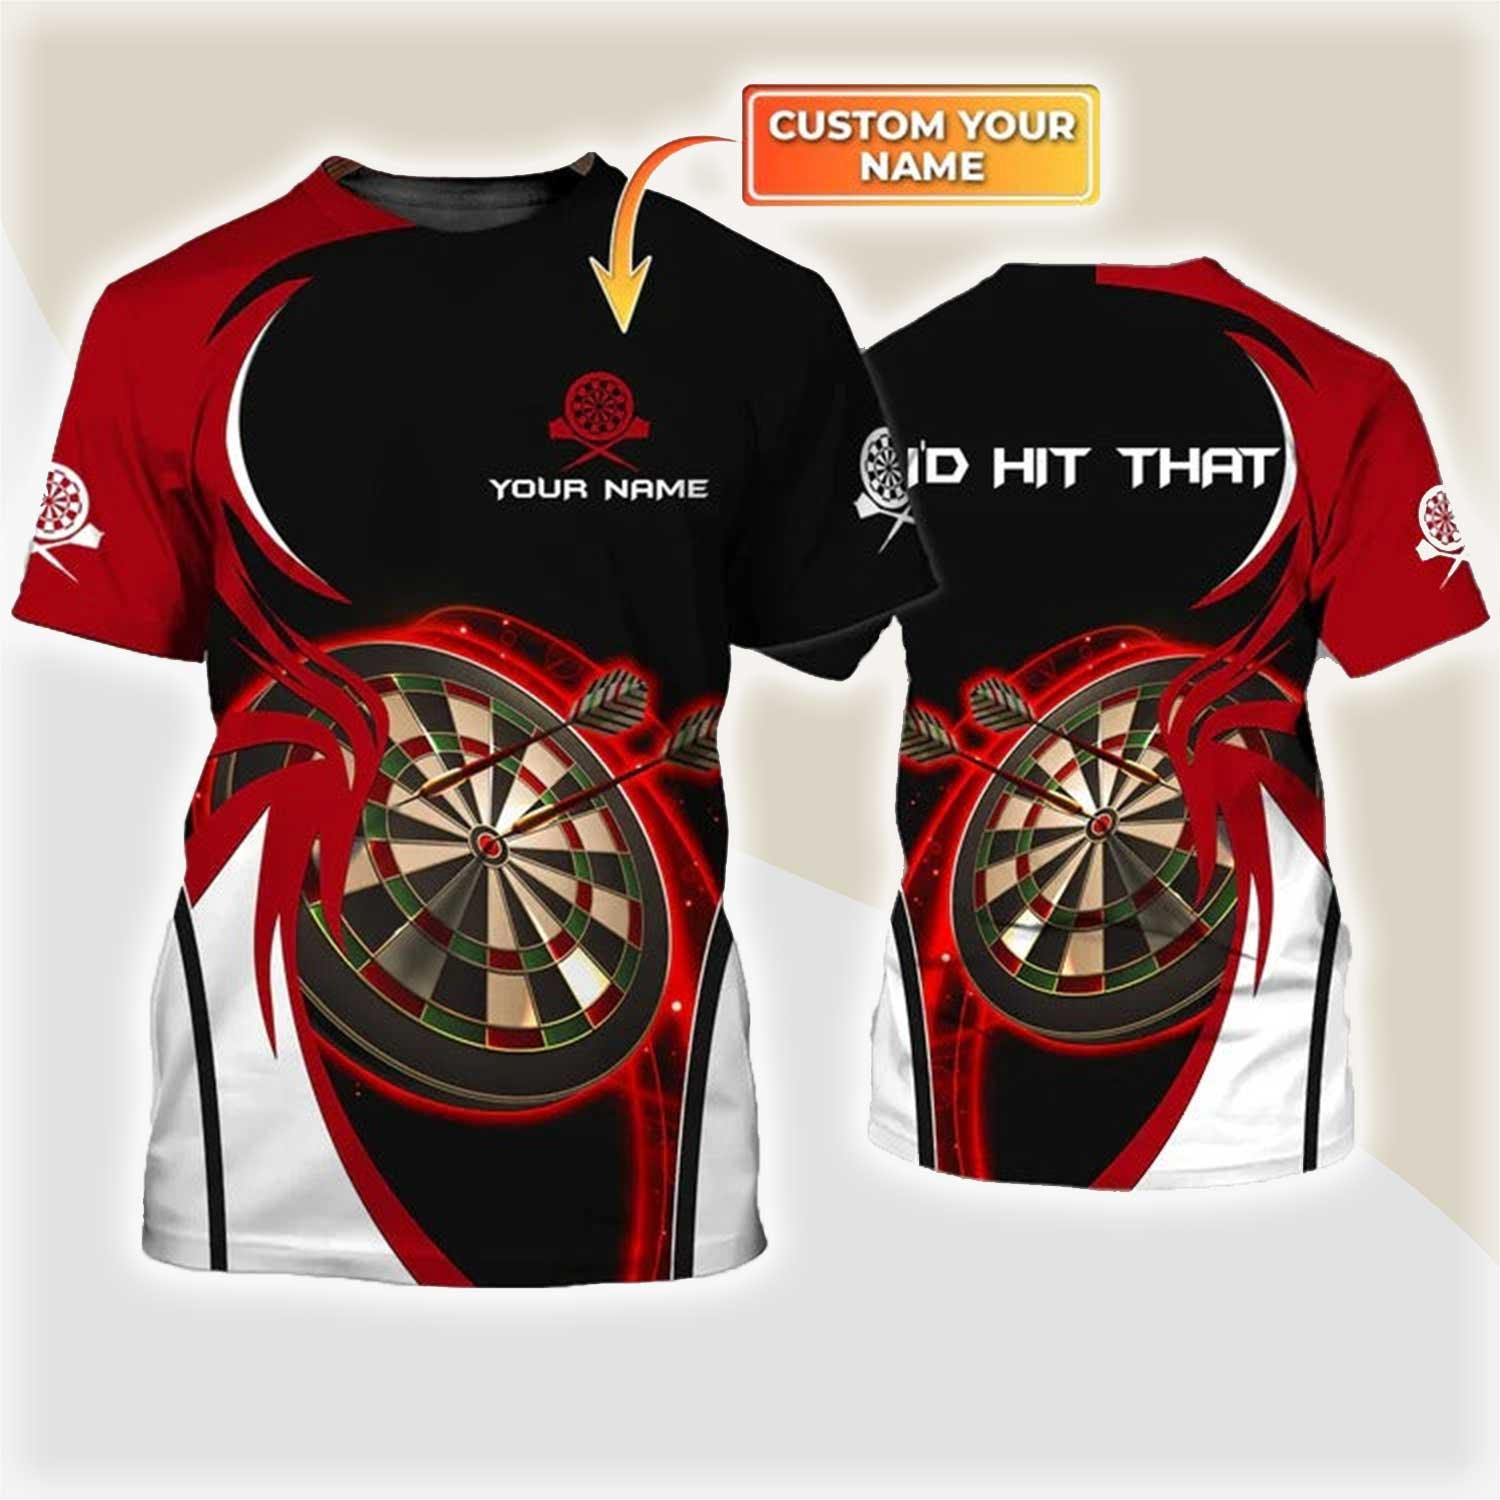 Customized Darts T Shirt, I'D Hit That Darts, Personalized Name T Shirt For Men And Women - Perfect Gift For Darts Lovers, Darts Players - Amzanimalsgift